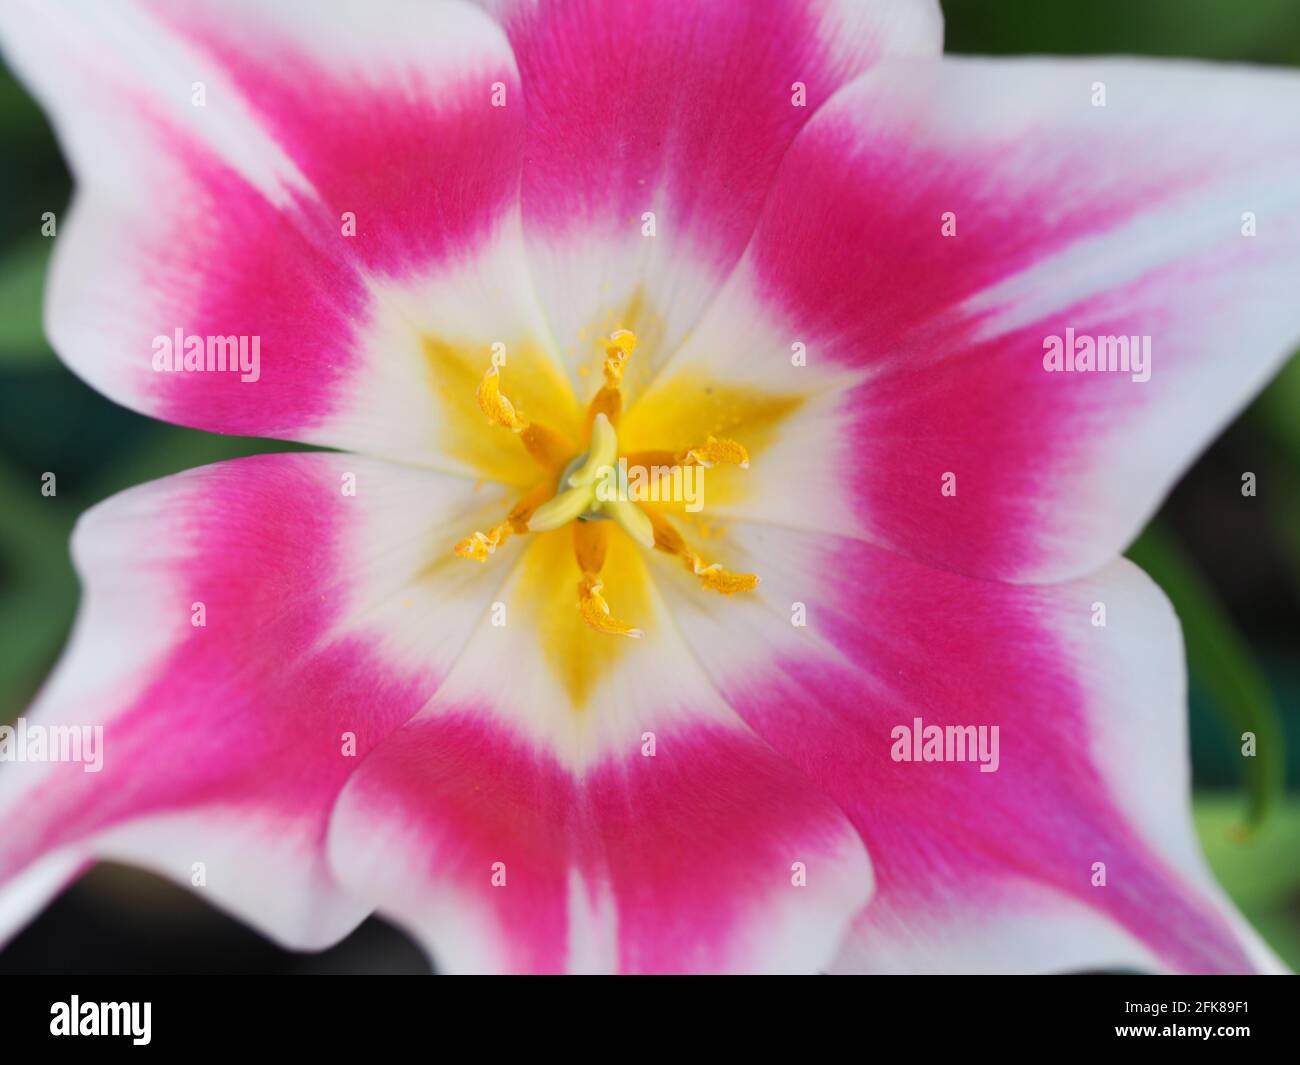 Tulipa 'Ballade'; detail of the pink and white petals and yellow centre of the flower showing the art of nature. Stock Photo